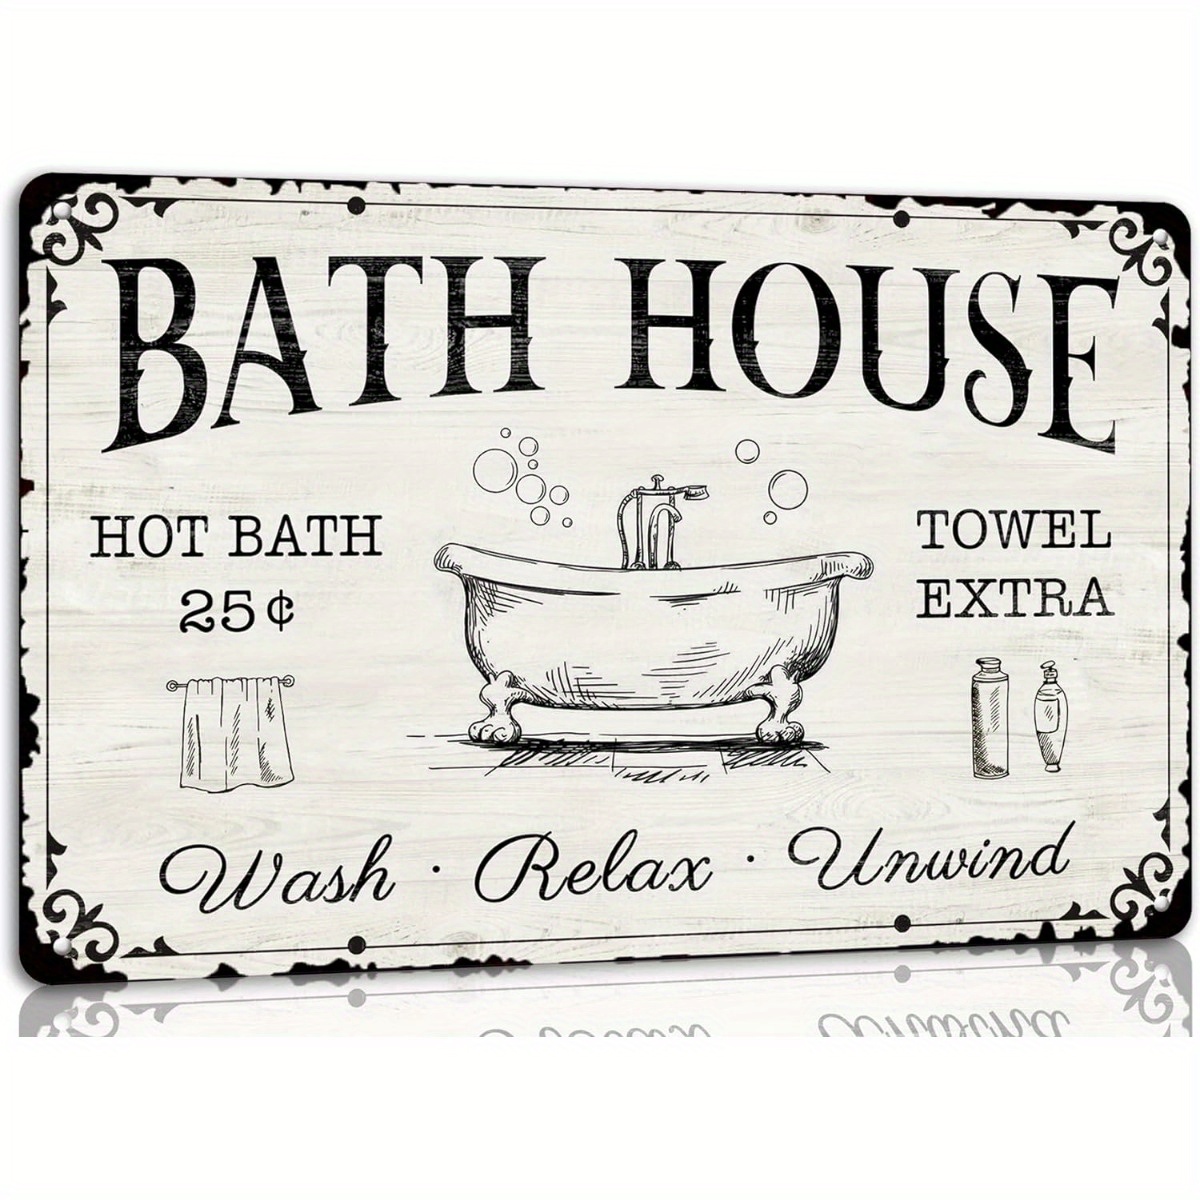 

Bath House Vintage Metal Tin Sign - Relaxing Farmhouse Bathroom Wall Decor With Hot Bath Towel Extra Wash Relax Unwind Plaque - 8x12 Inch Retro Home Decor Gift